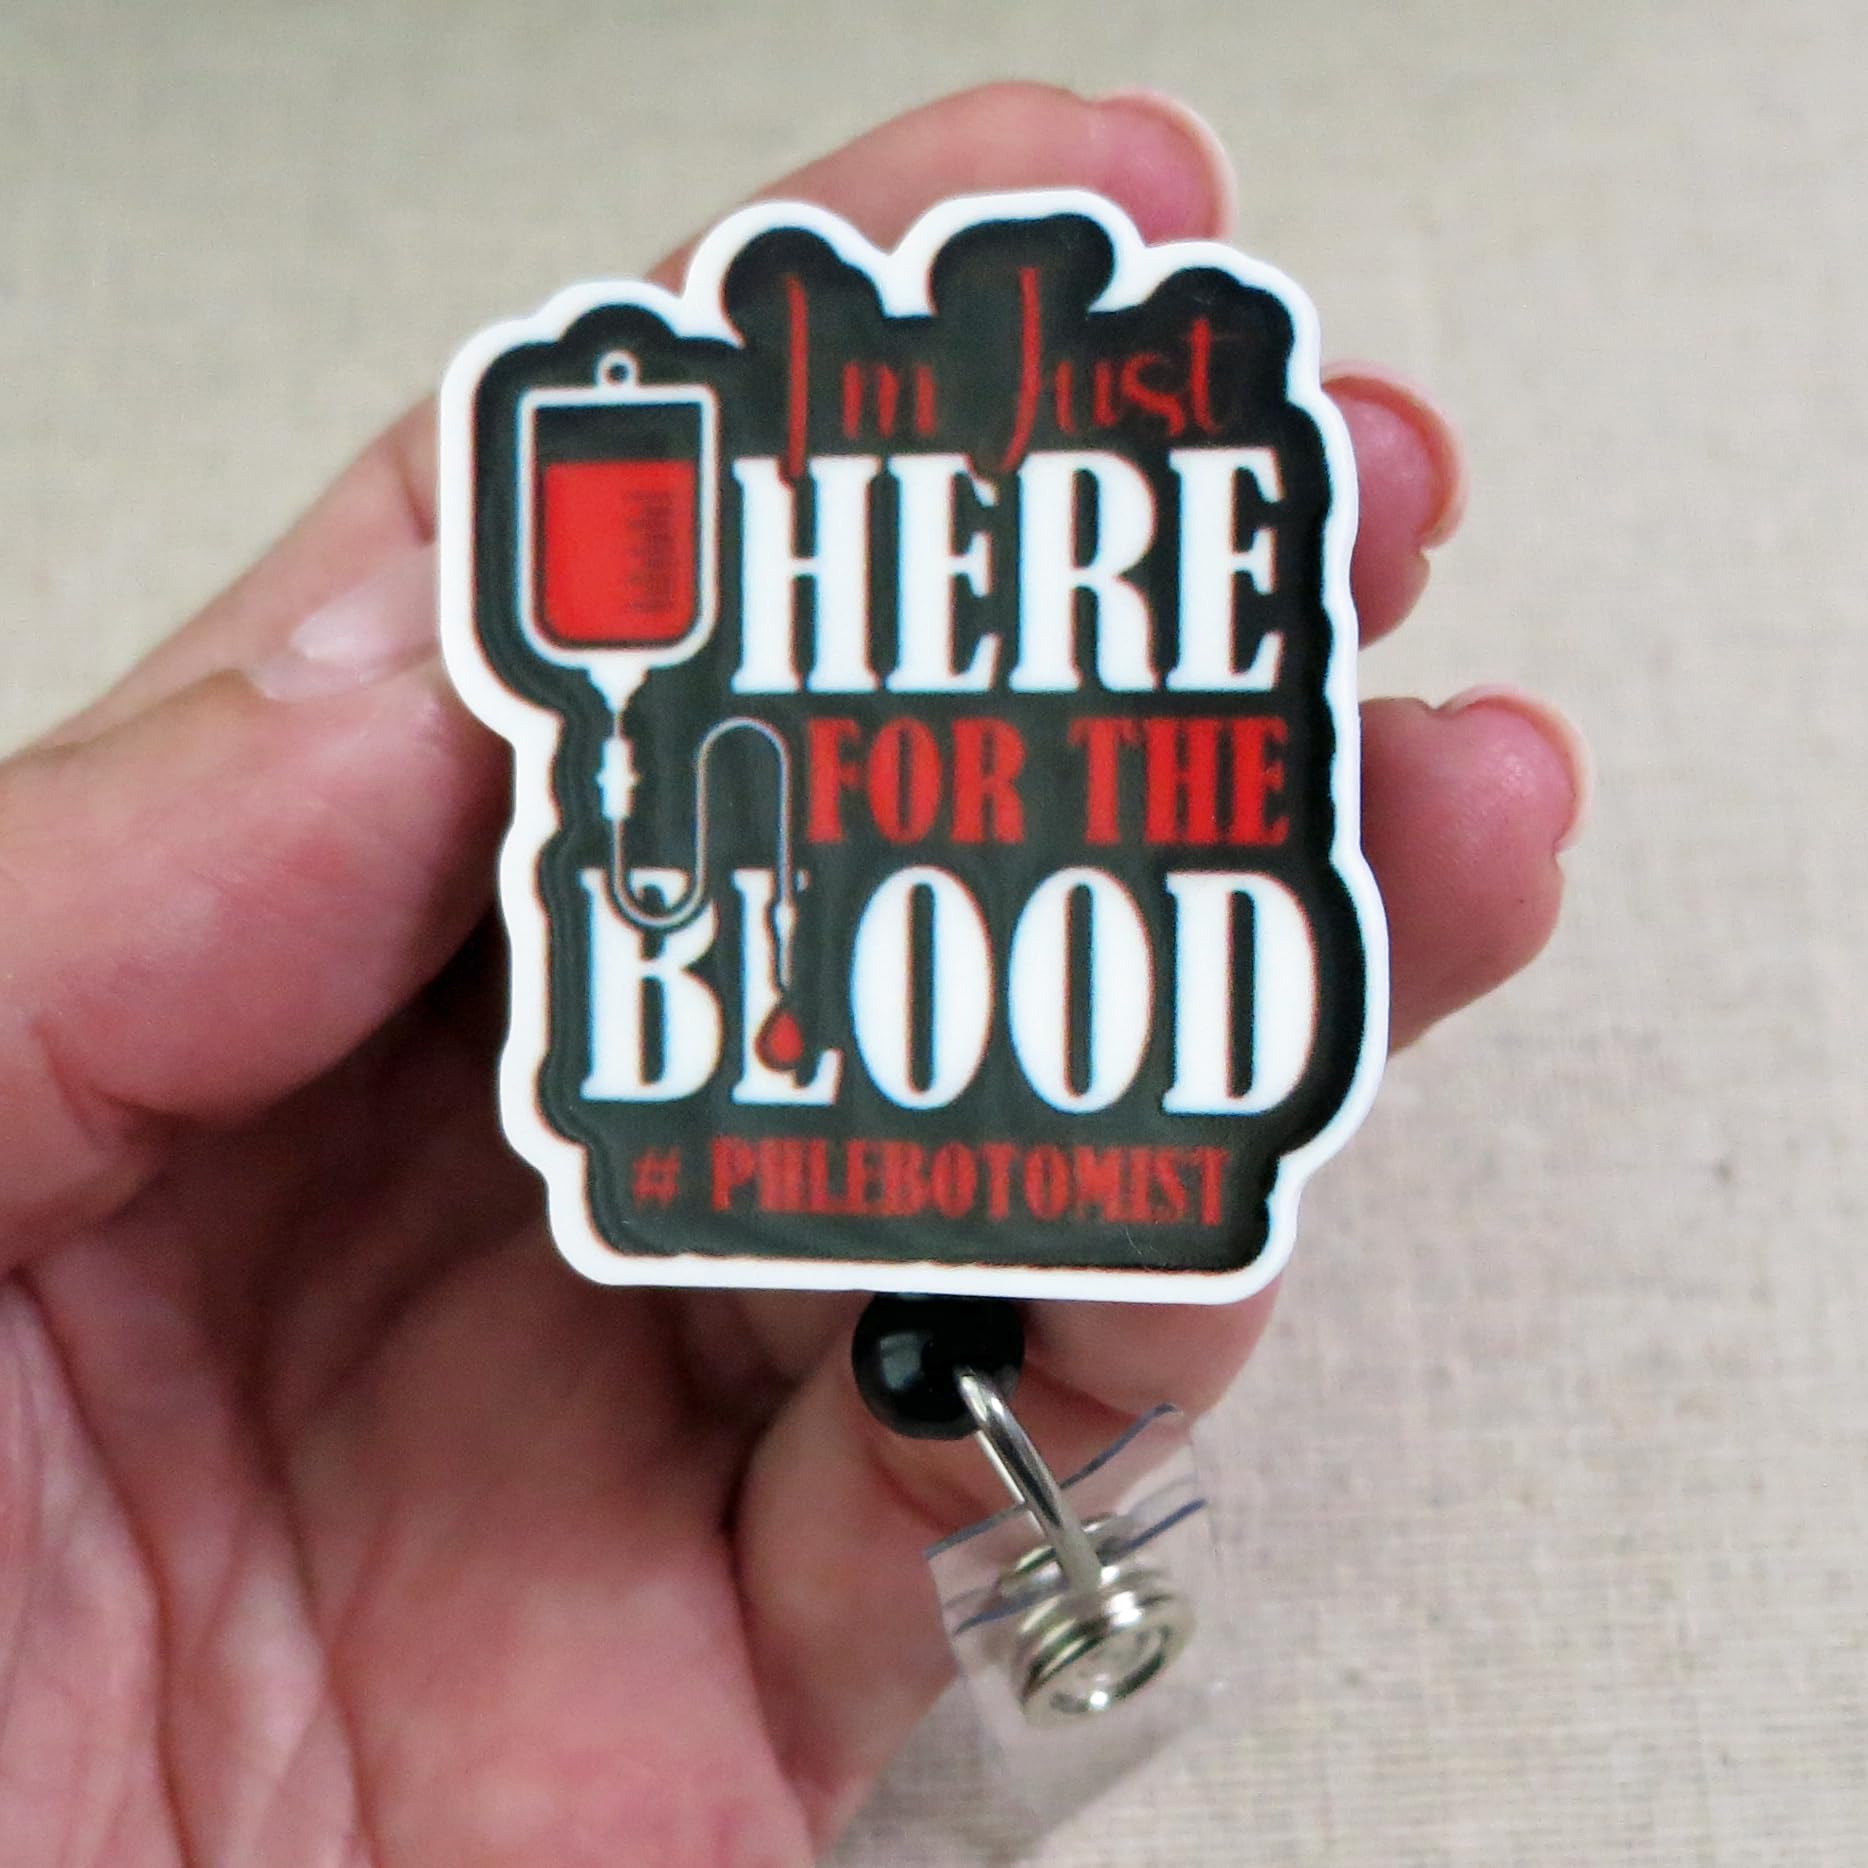 I'm Just Here for the Blood - Phlebotomist Badge Reel, Cute Phlebotomy Tech Blood Draw Retractable ID Badge Holder, Blood Donor Month, Lab Tech Badge Reel, Hematologist Gift